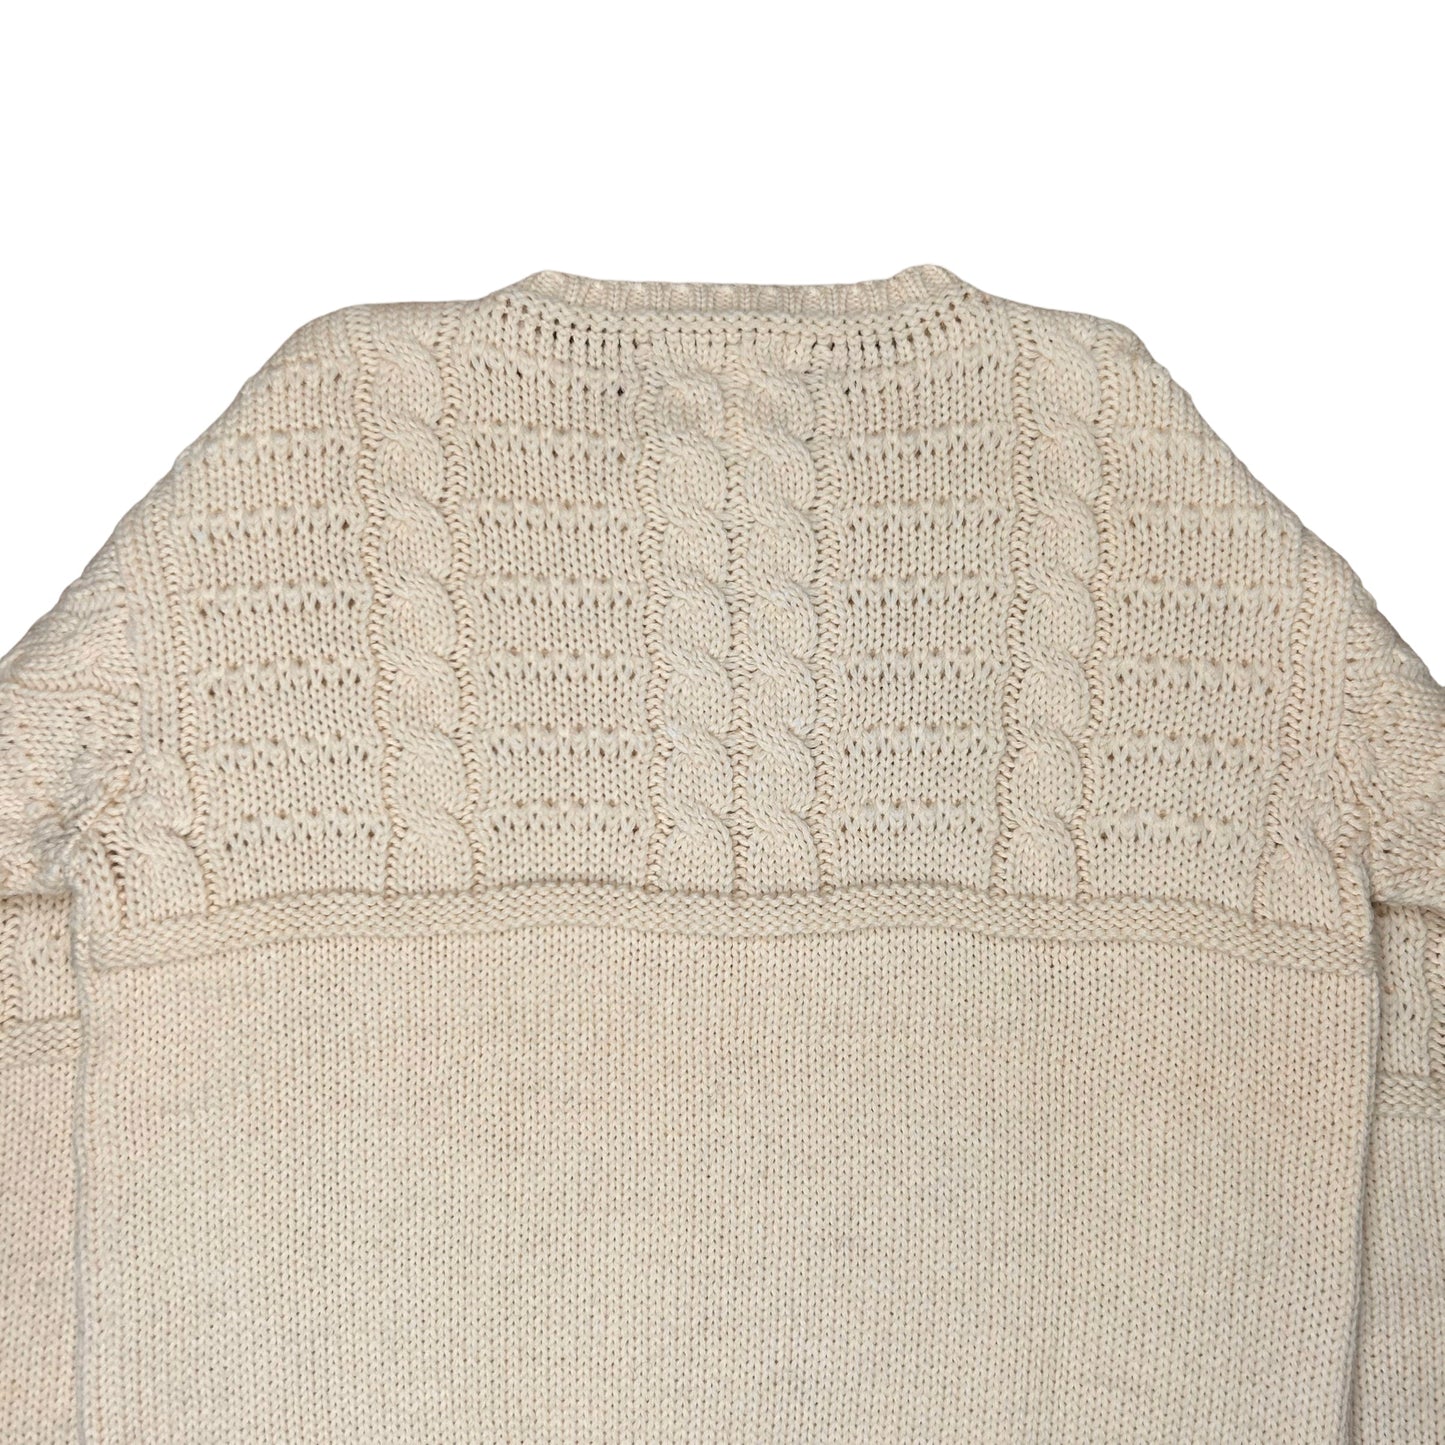 Yohji Yamamoto Pour Homme Hybrid Cable Knit Sweater - AW93